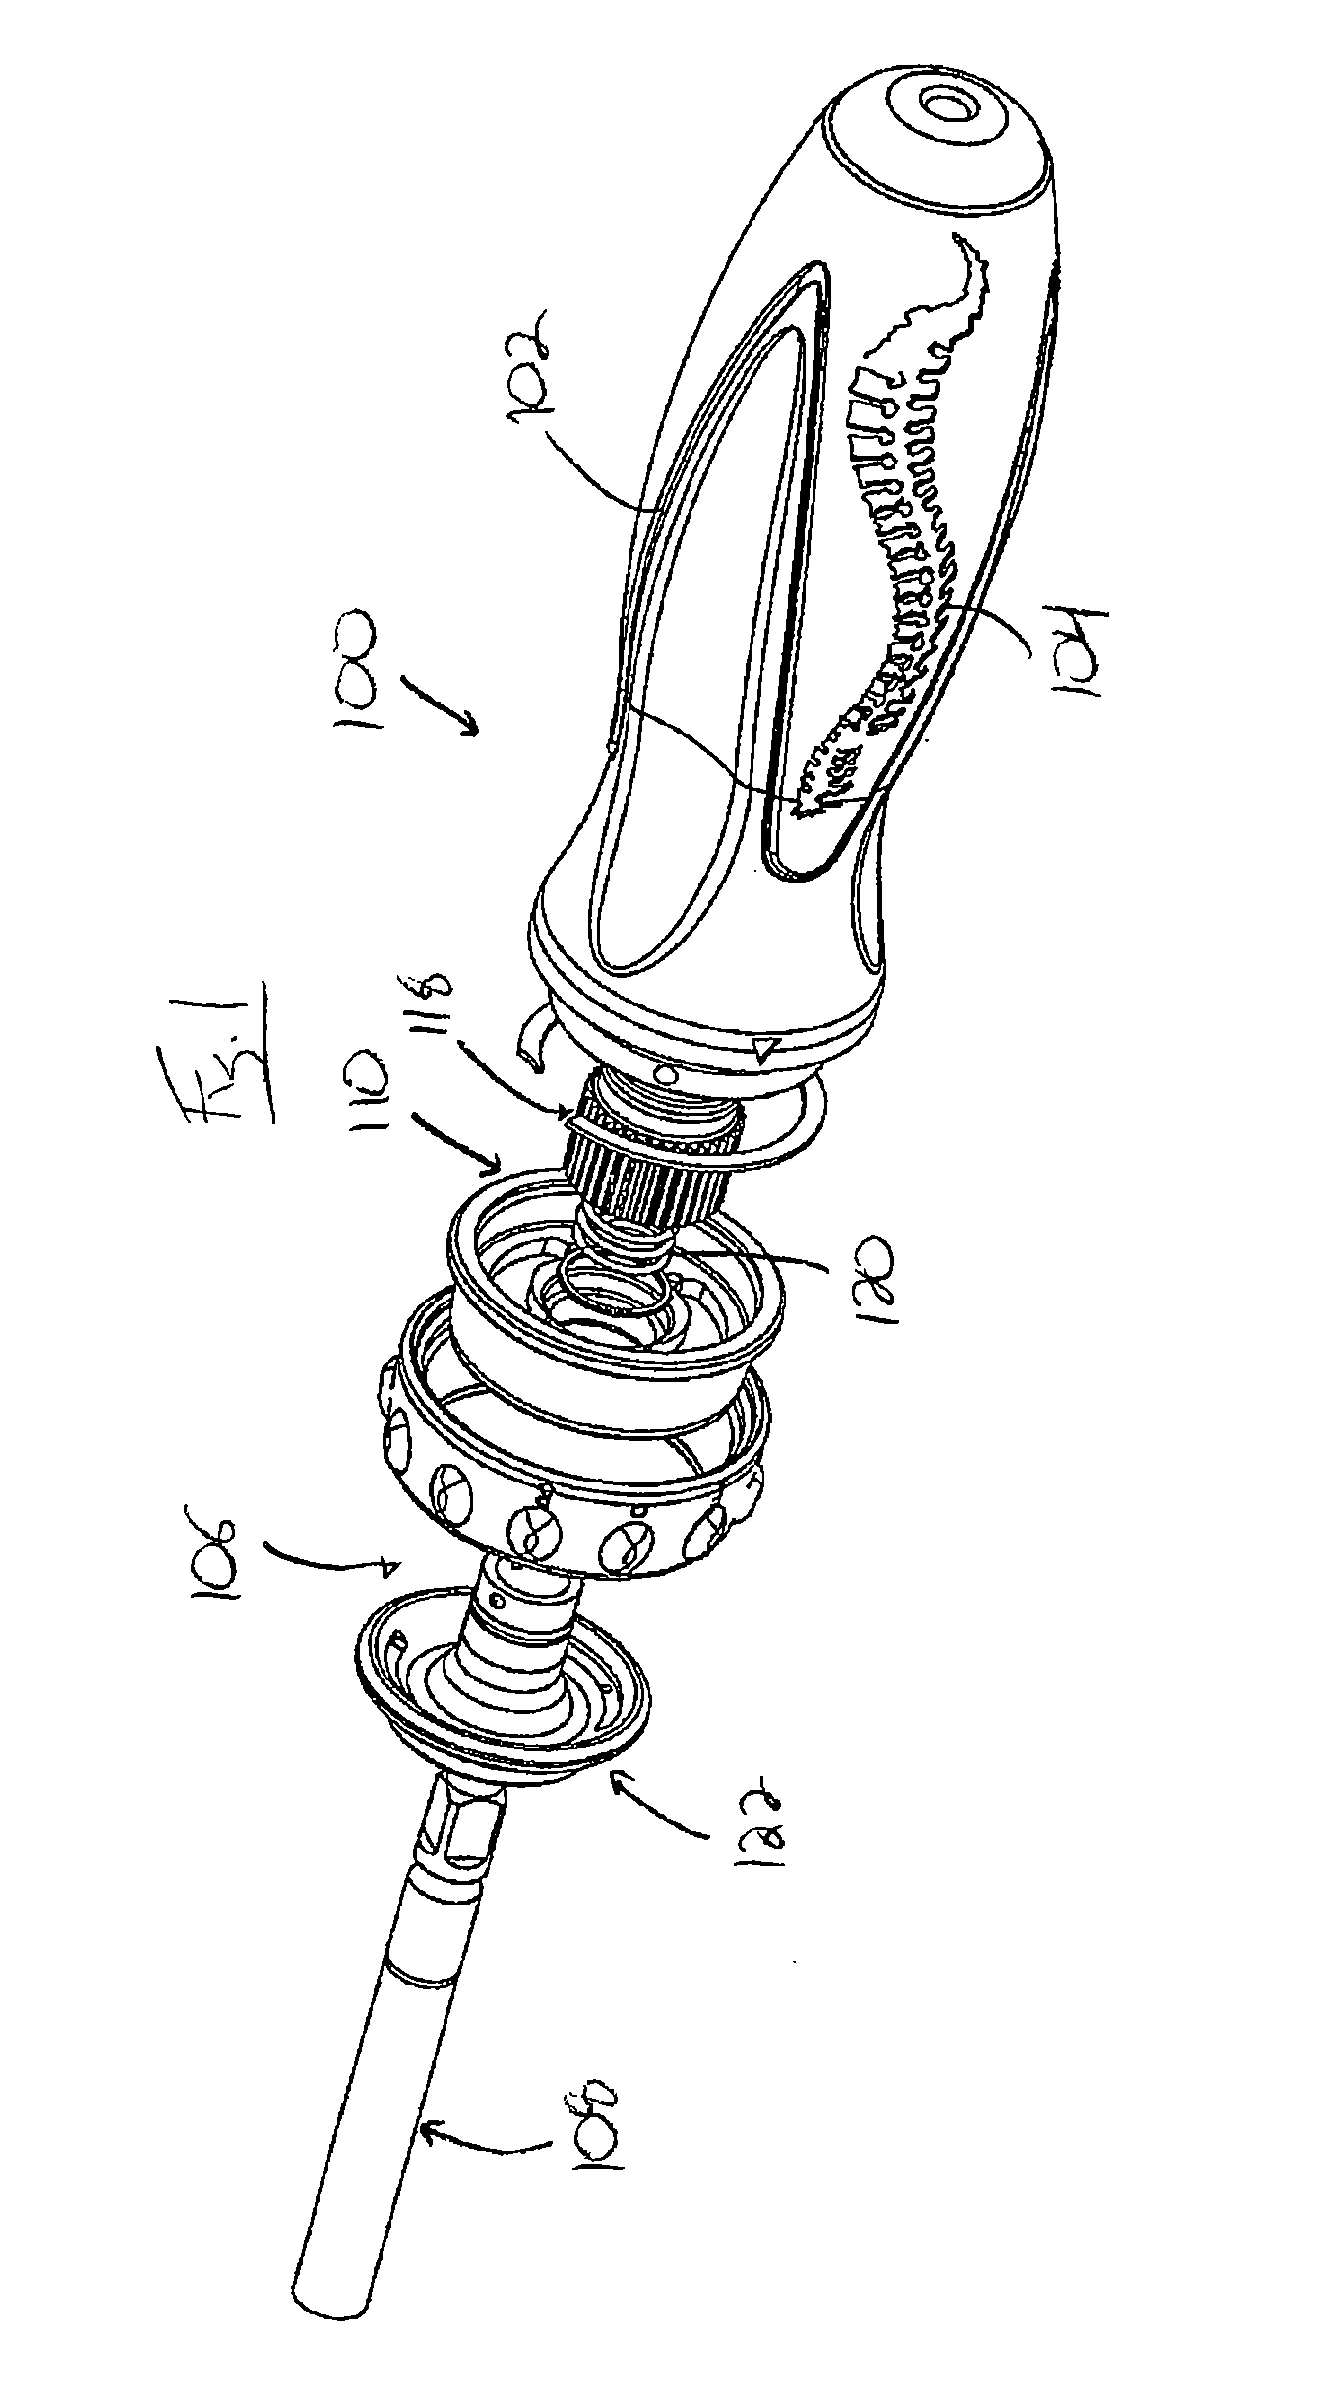 Shaft securing mechanism for a tool